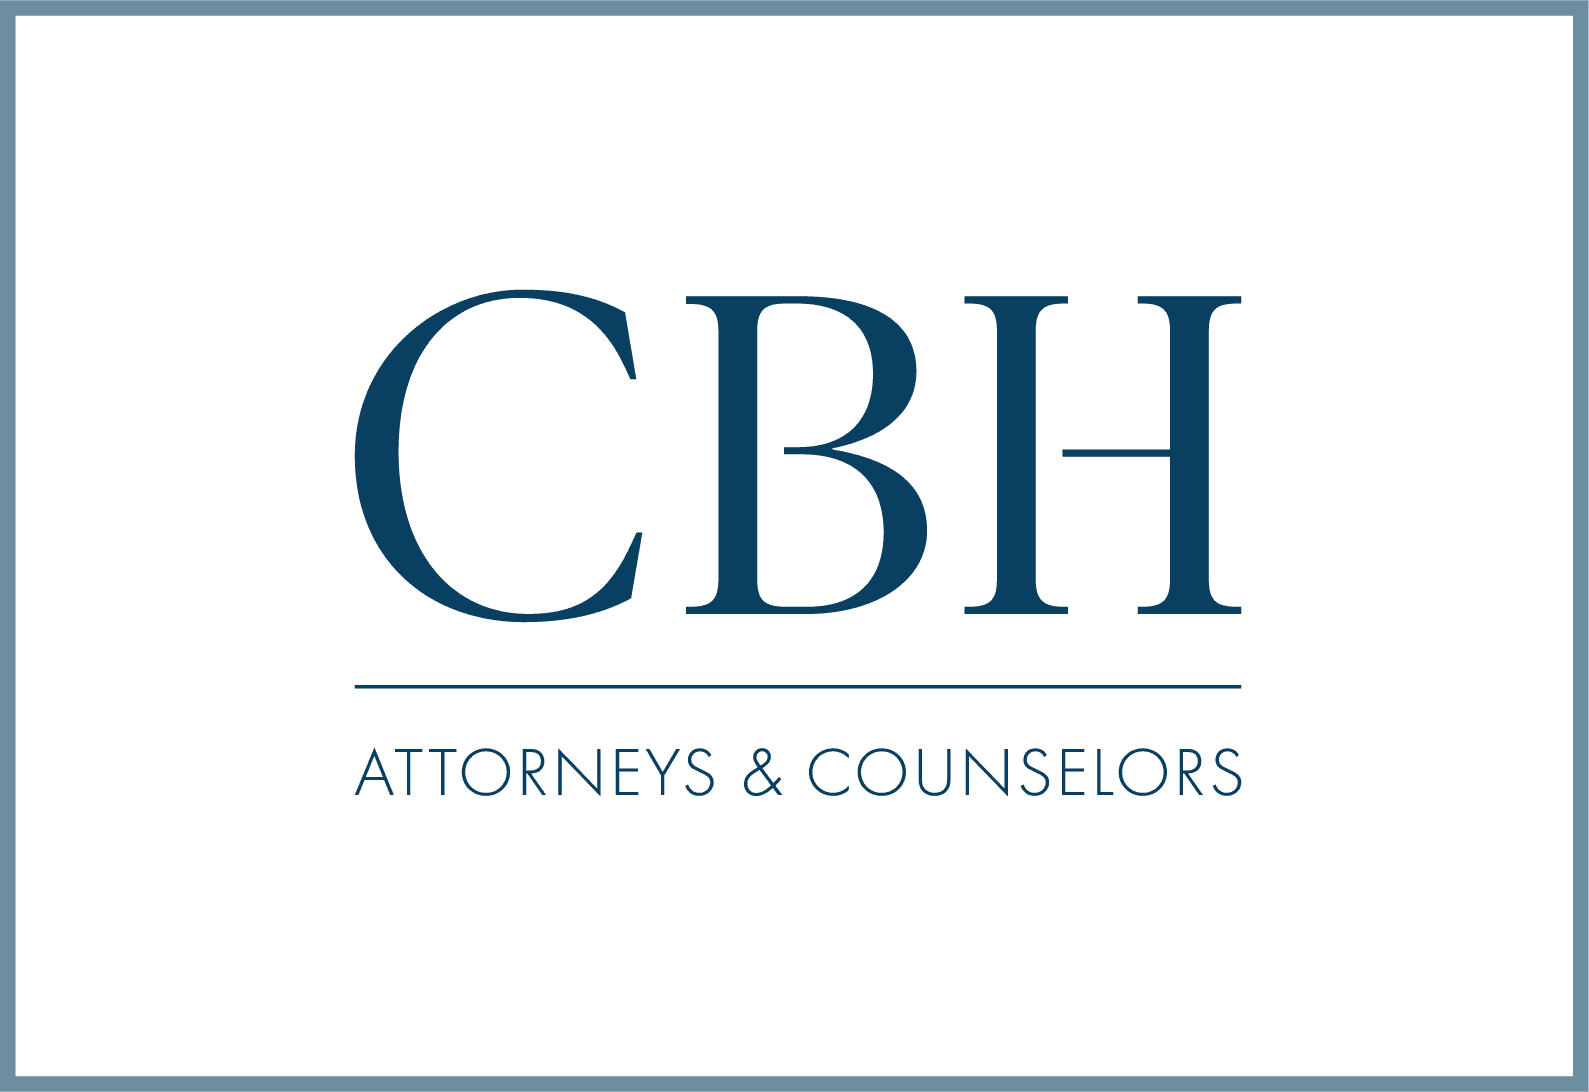 CBH Attorneys & Counselors